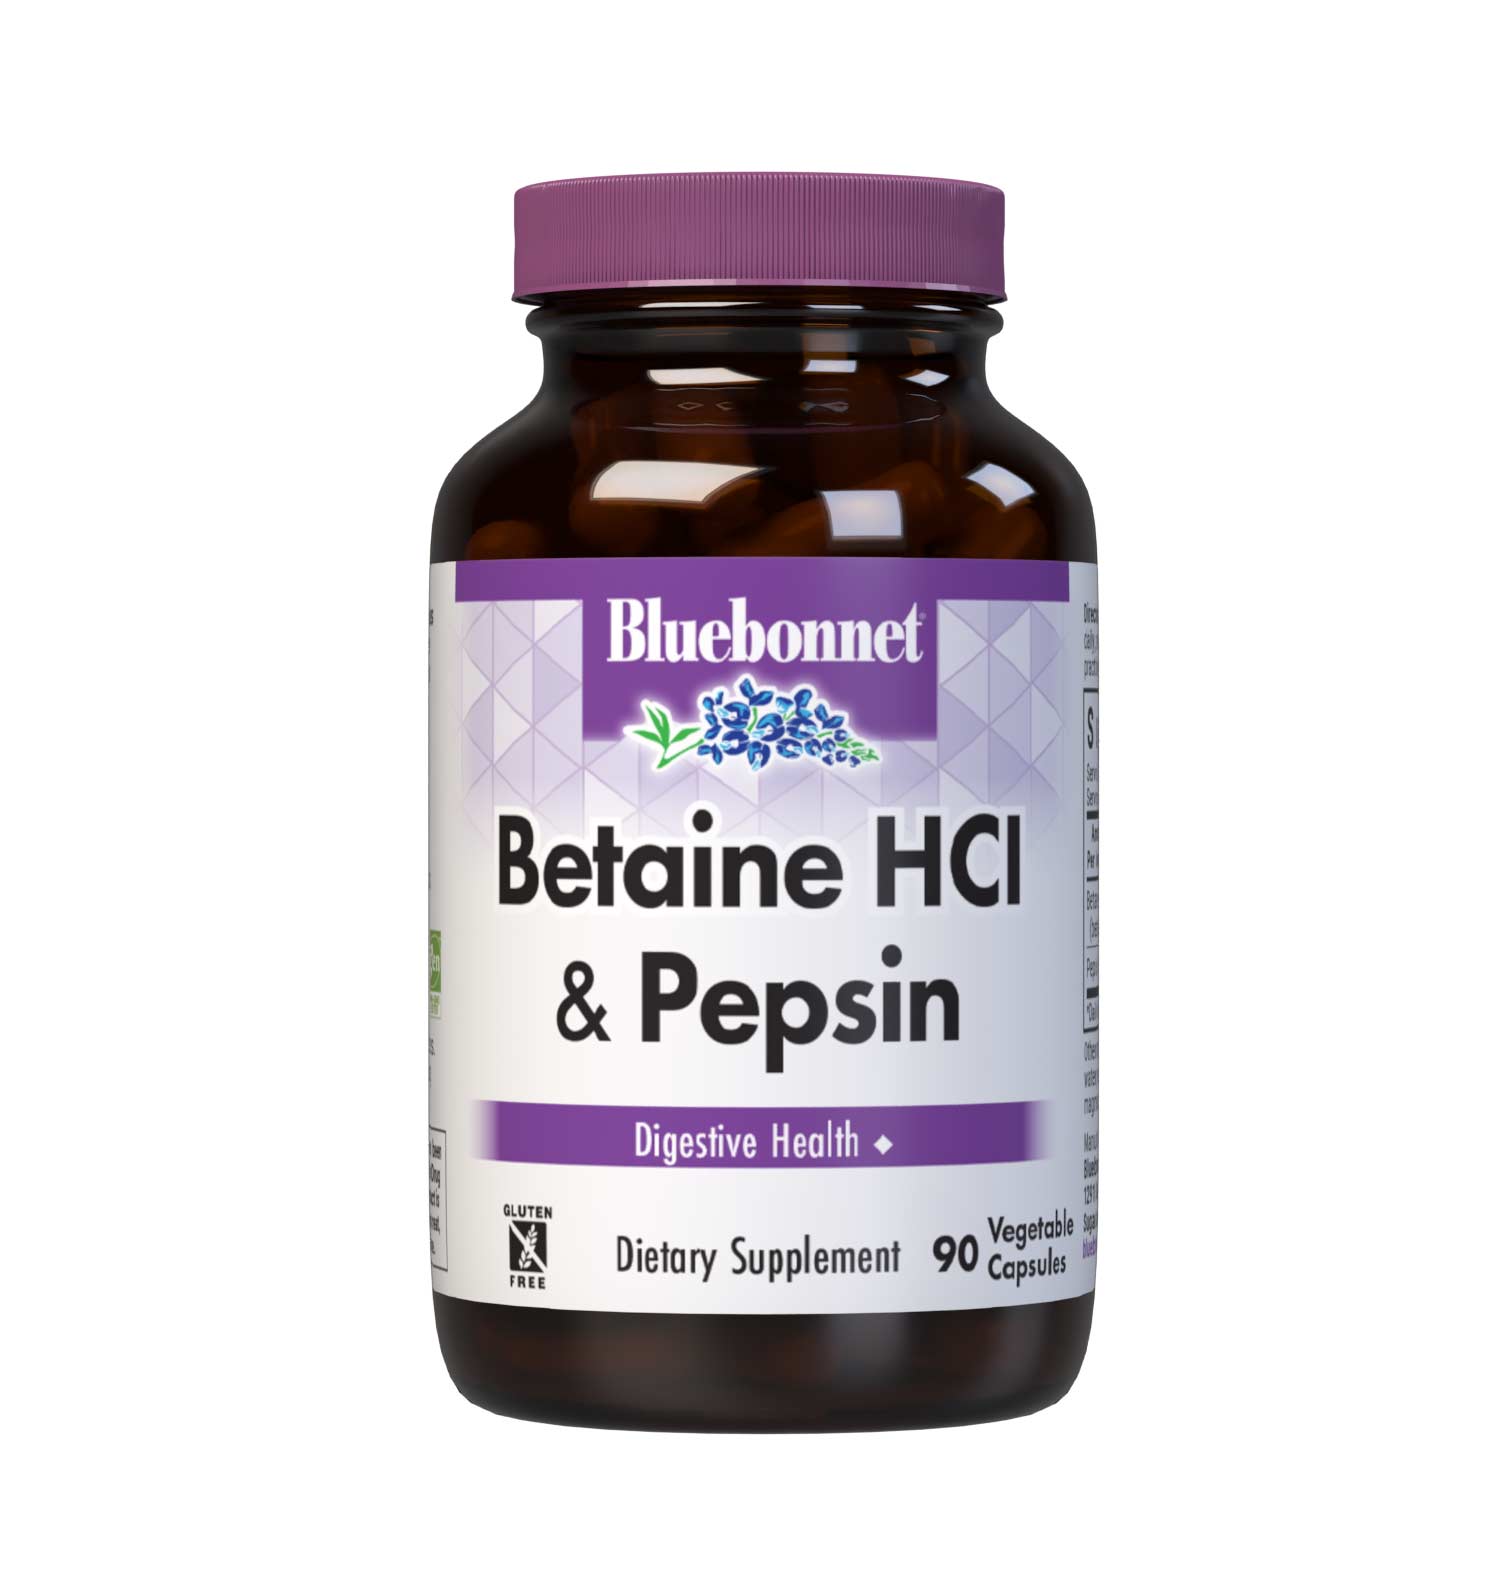 Bluebonnet’s Betaine HCl Plus Pepsin 90 Vegetable Capsules are formulated with a special combination of betaine hydrochloride and pepsin, a digestive enzyme. #size_90 count